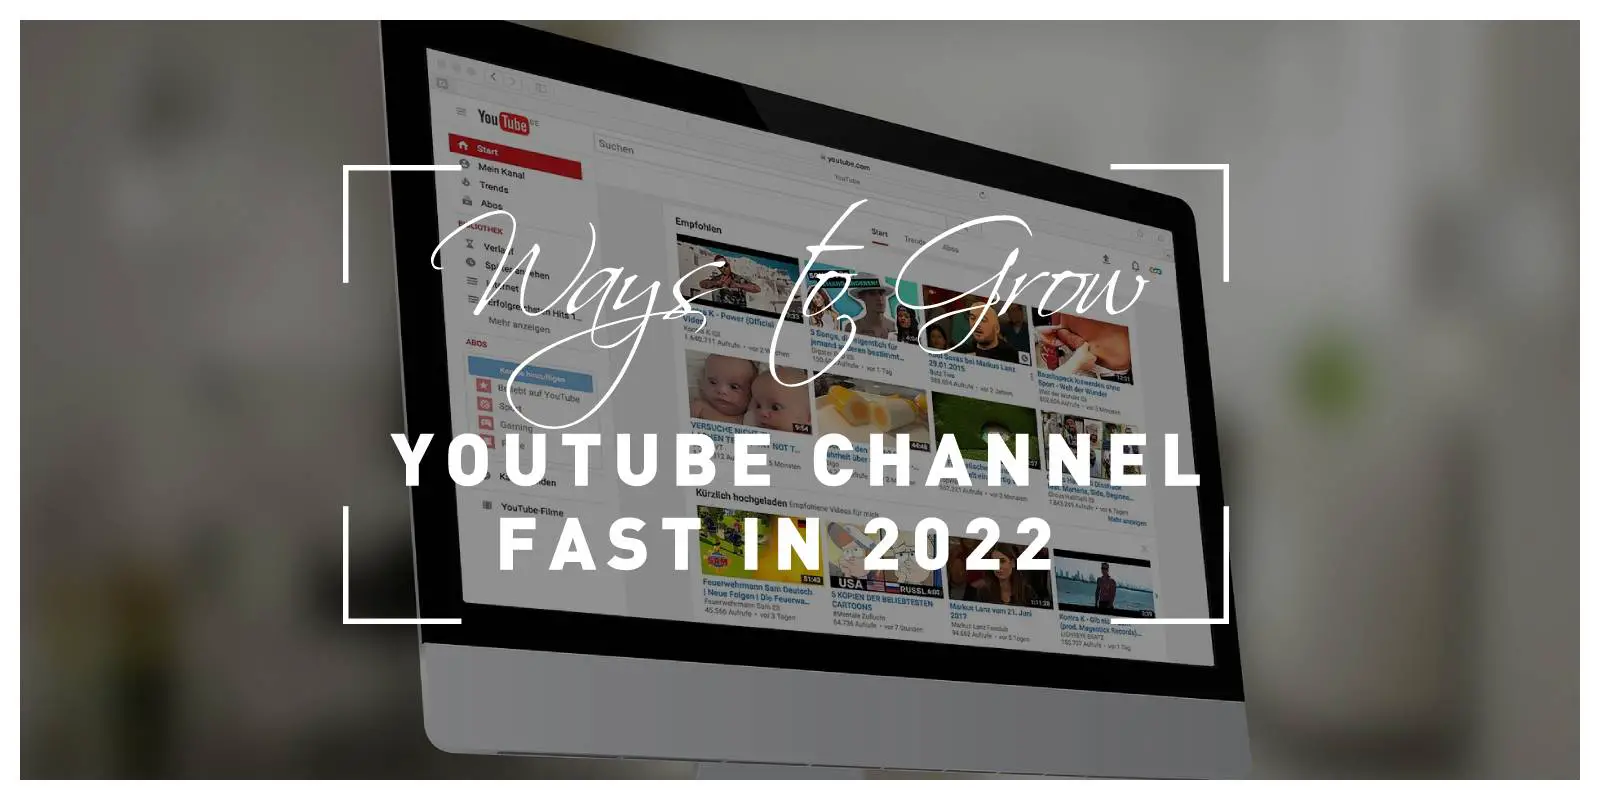 Four Proven Ways to Grow Your YouTube Channel Fast in 2022